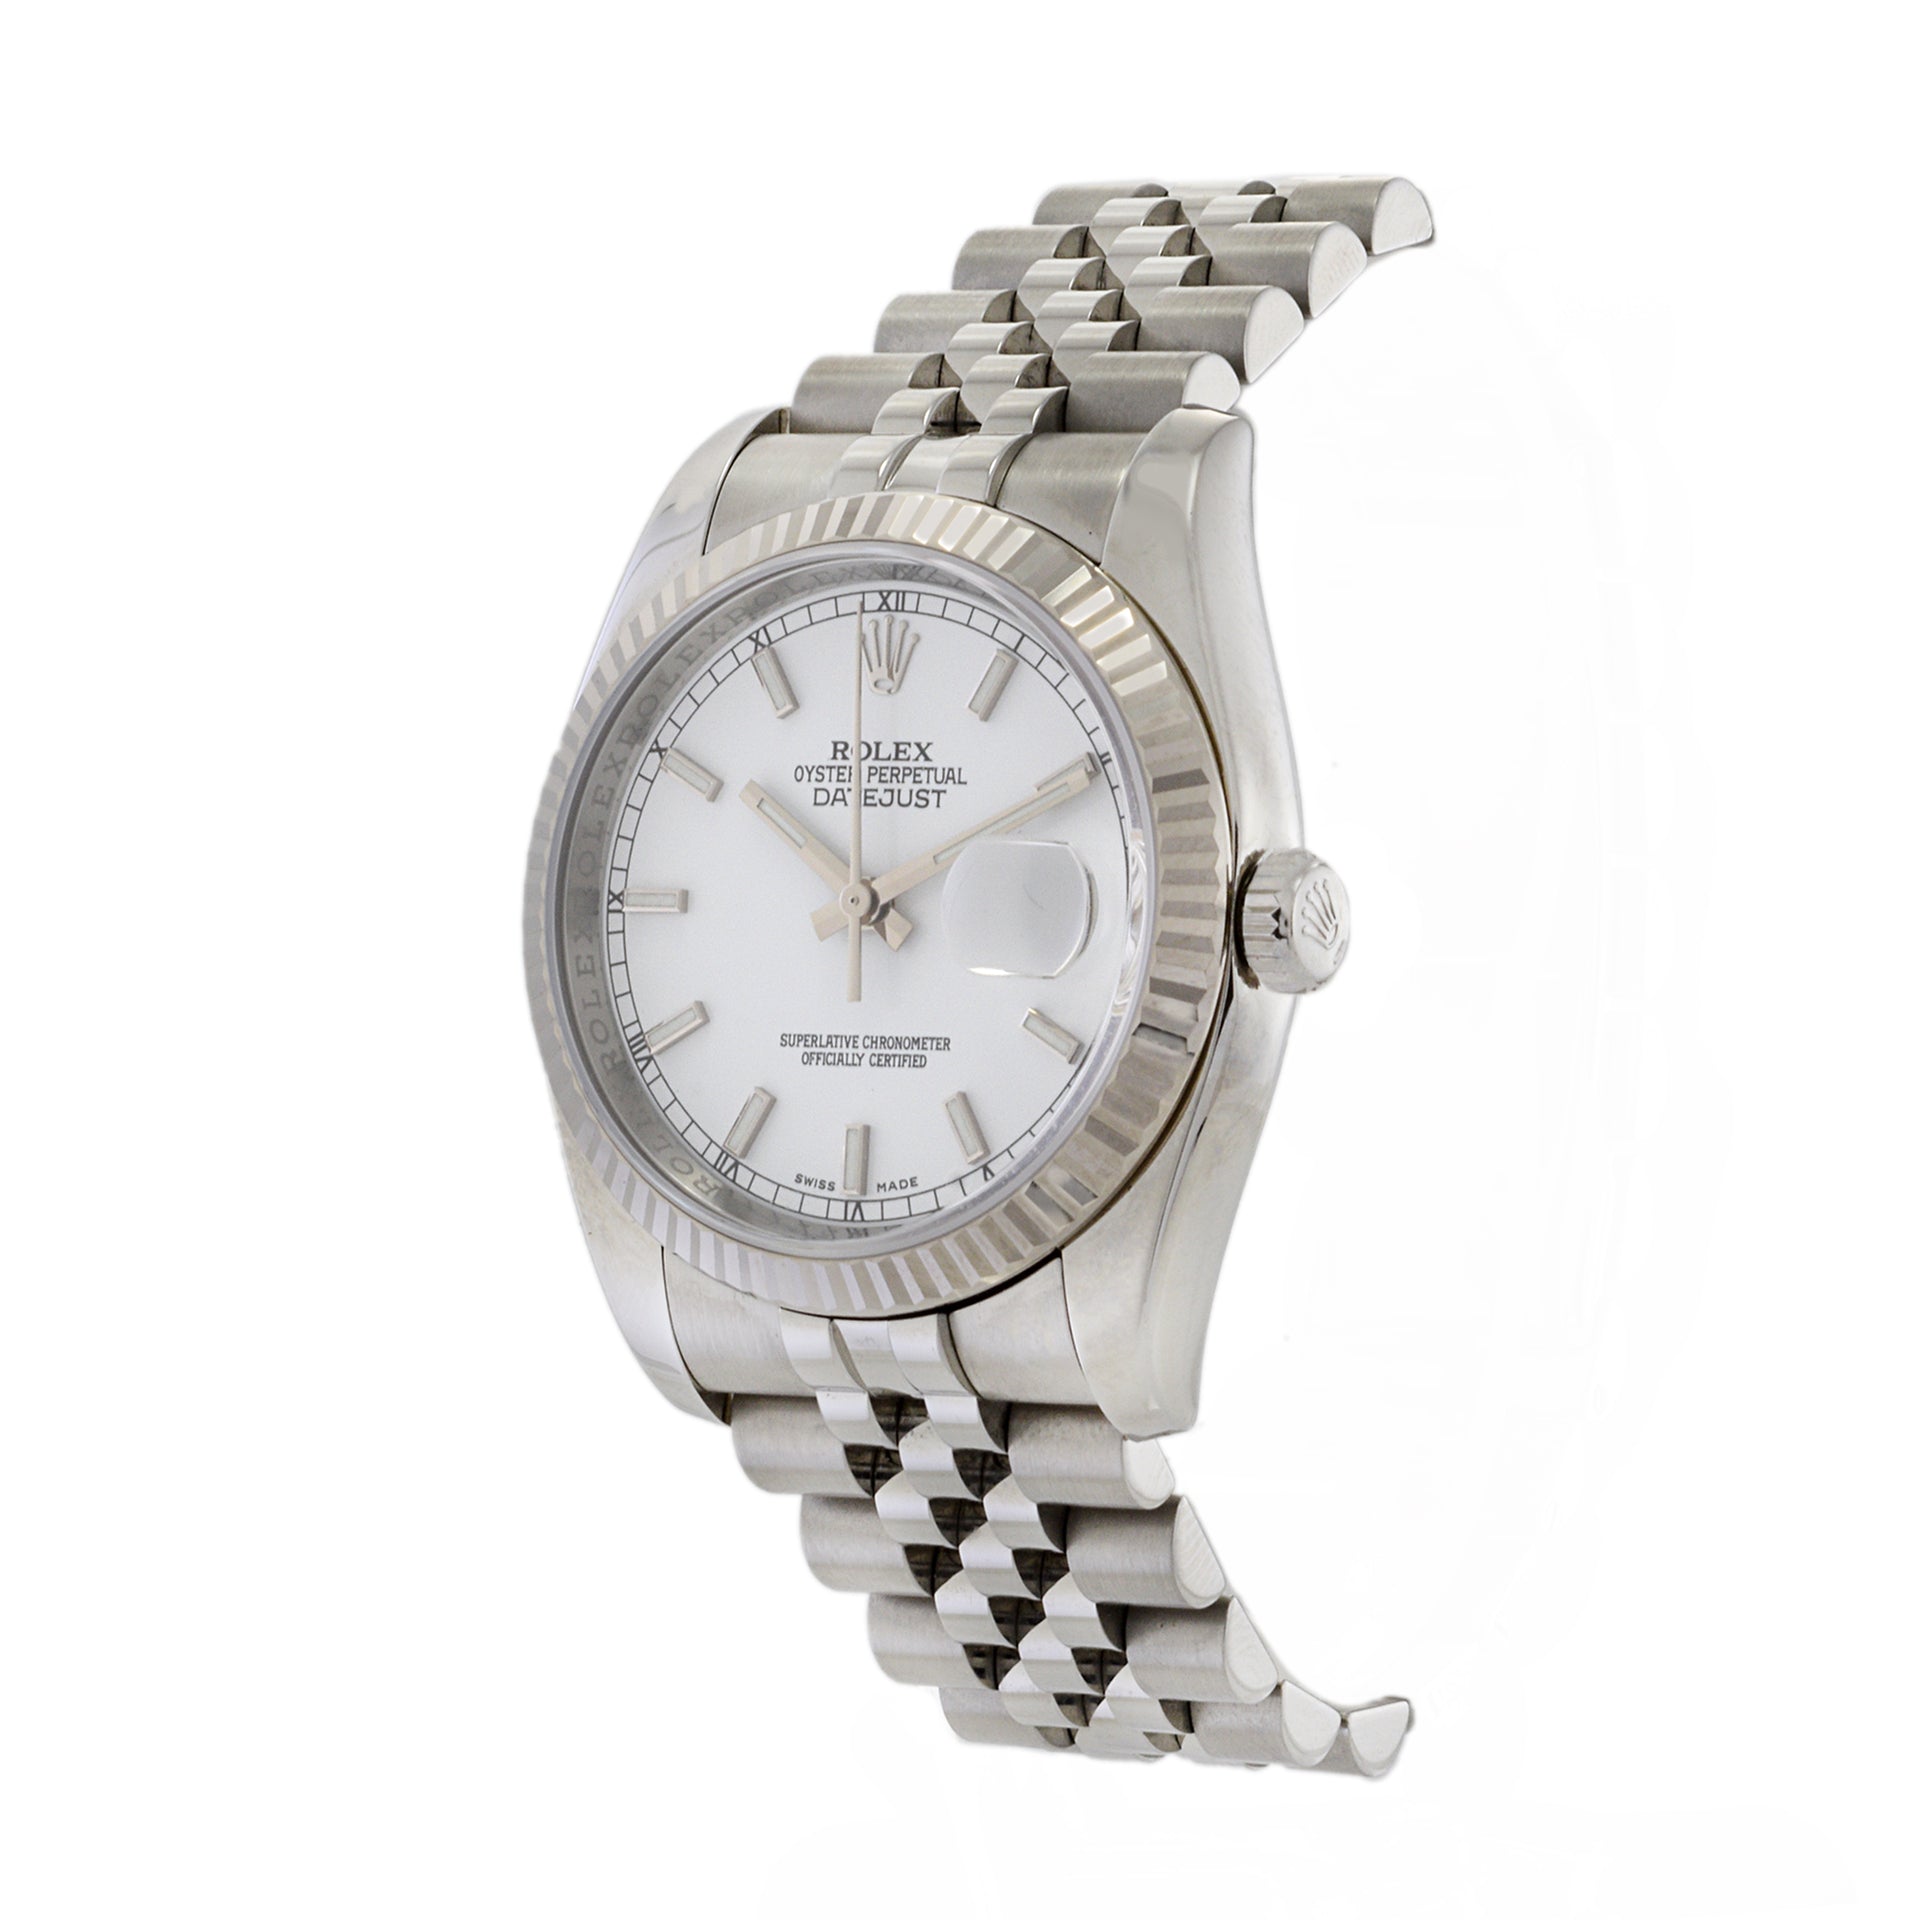 Rolex Datejust Reference 116234 Stainless Steel and 18K White Gold